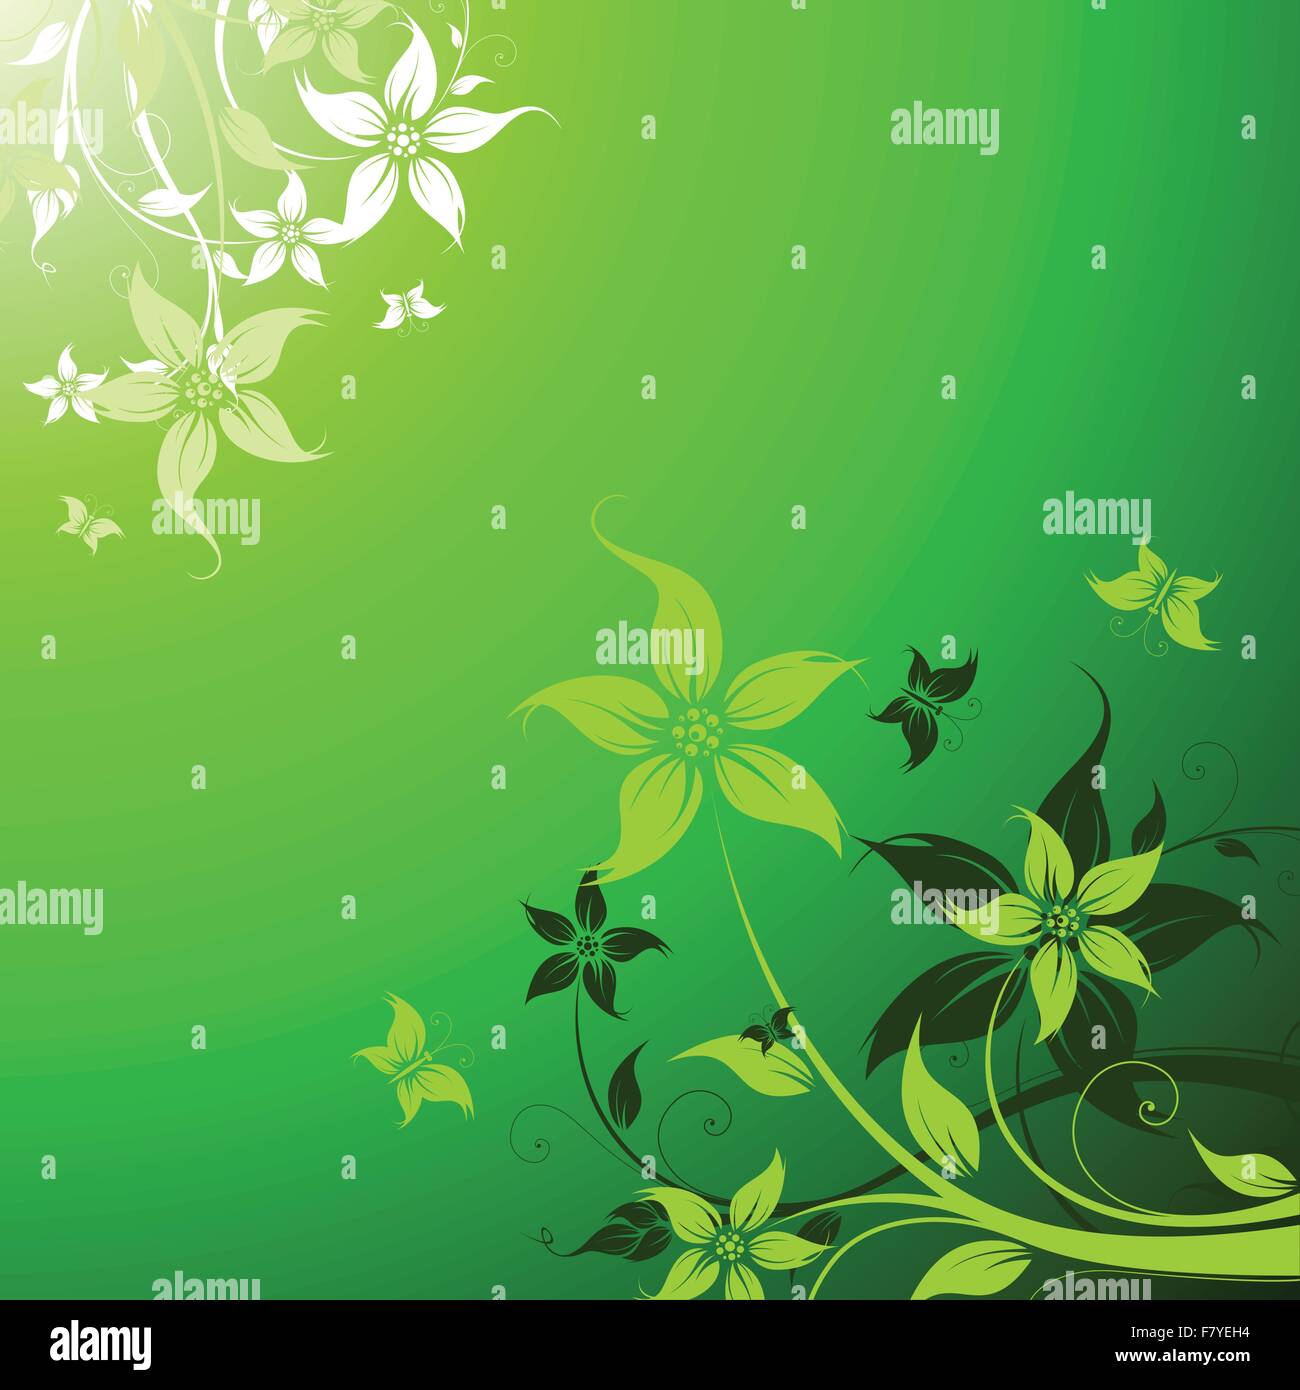 Vector floral background Stock Vector